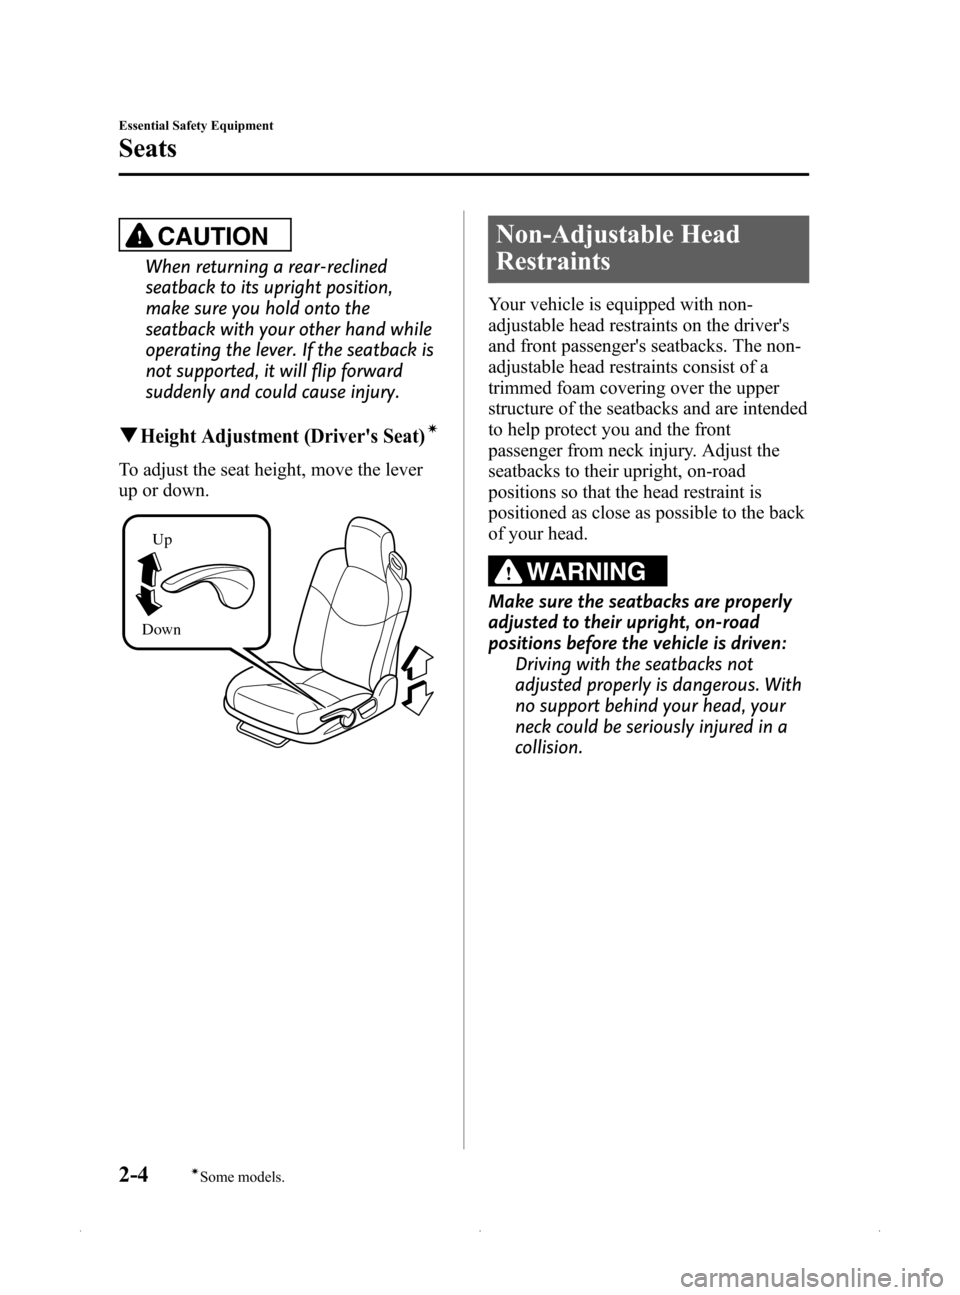 MAZDA MODEL MX-5 2015  Owners Manual (in English) Black plate (16,1)
CAUTION
When returning a rear-reclined
seatback to its upright position,
make sure you hold onto the
seatback with your other hand while
operating the lever. If the seatback is
not 